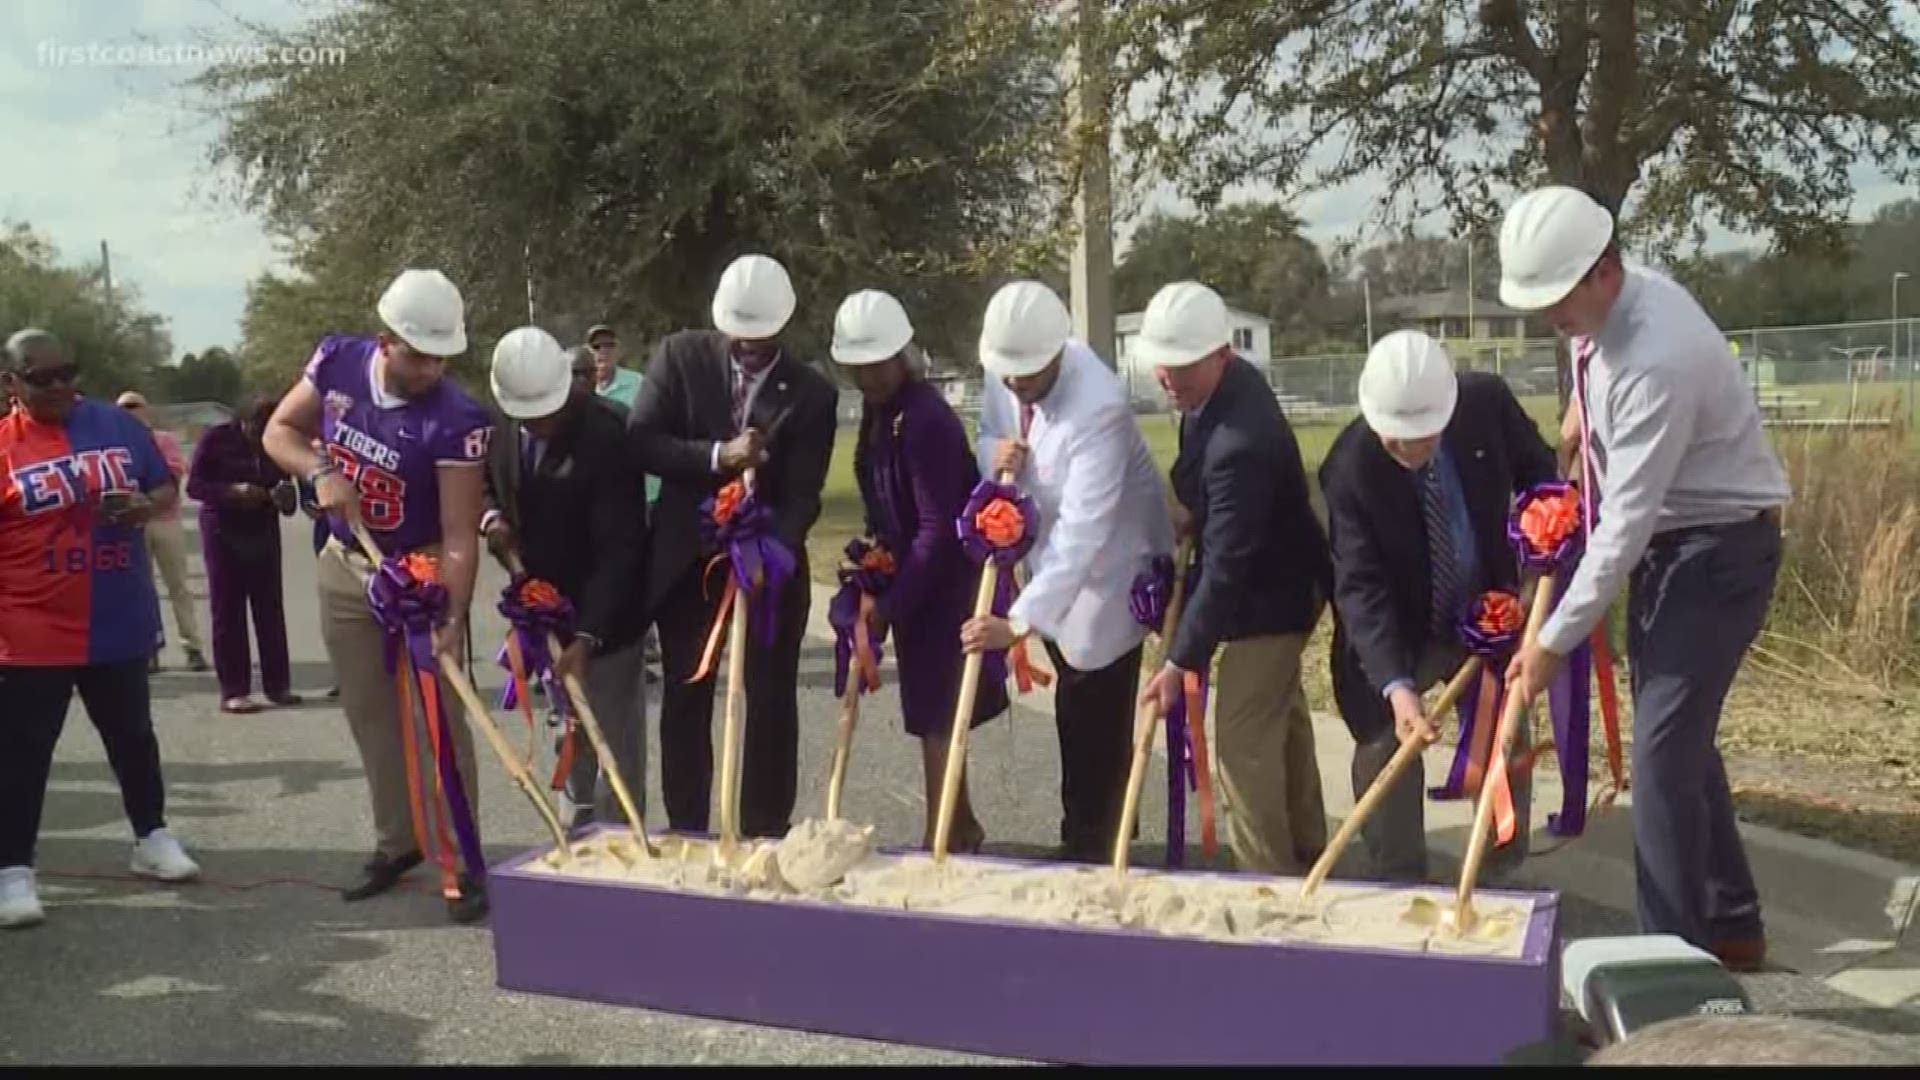 Mayor Curry did the honors of breaking ground at the site as the project is funded in part by $8.5 million given to the college by the city in the 2017-18 budget.